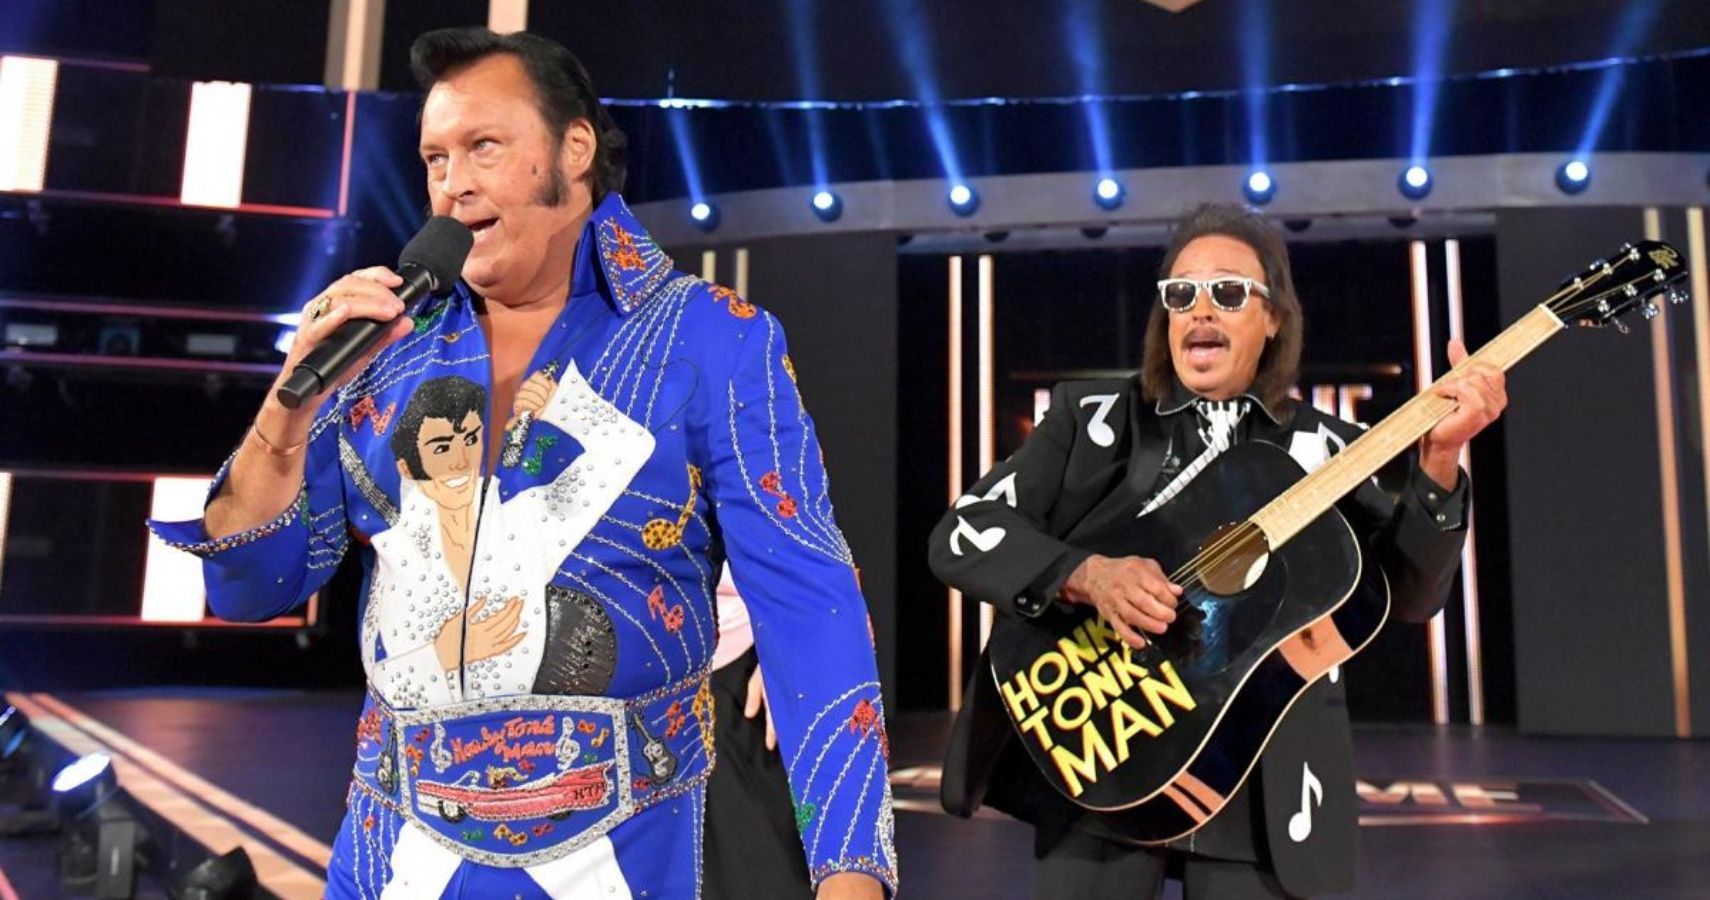 You Probably Wouldn't Recognize The Honky Tonk Man In His Latest Photo